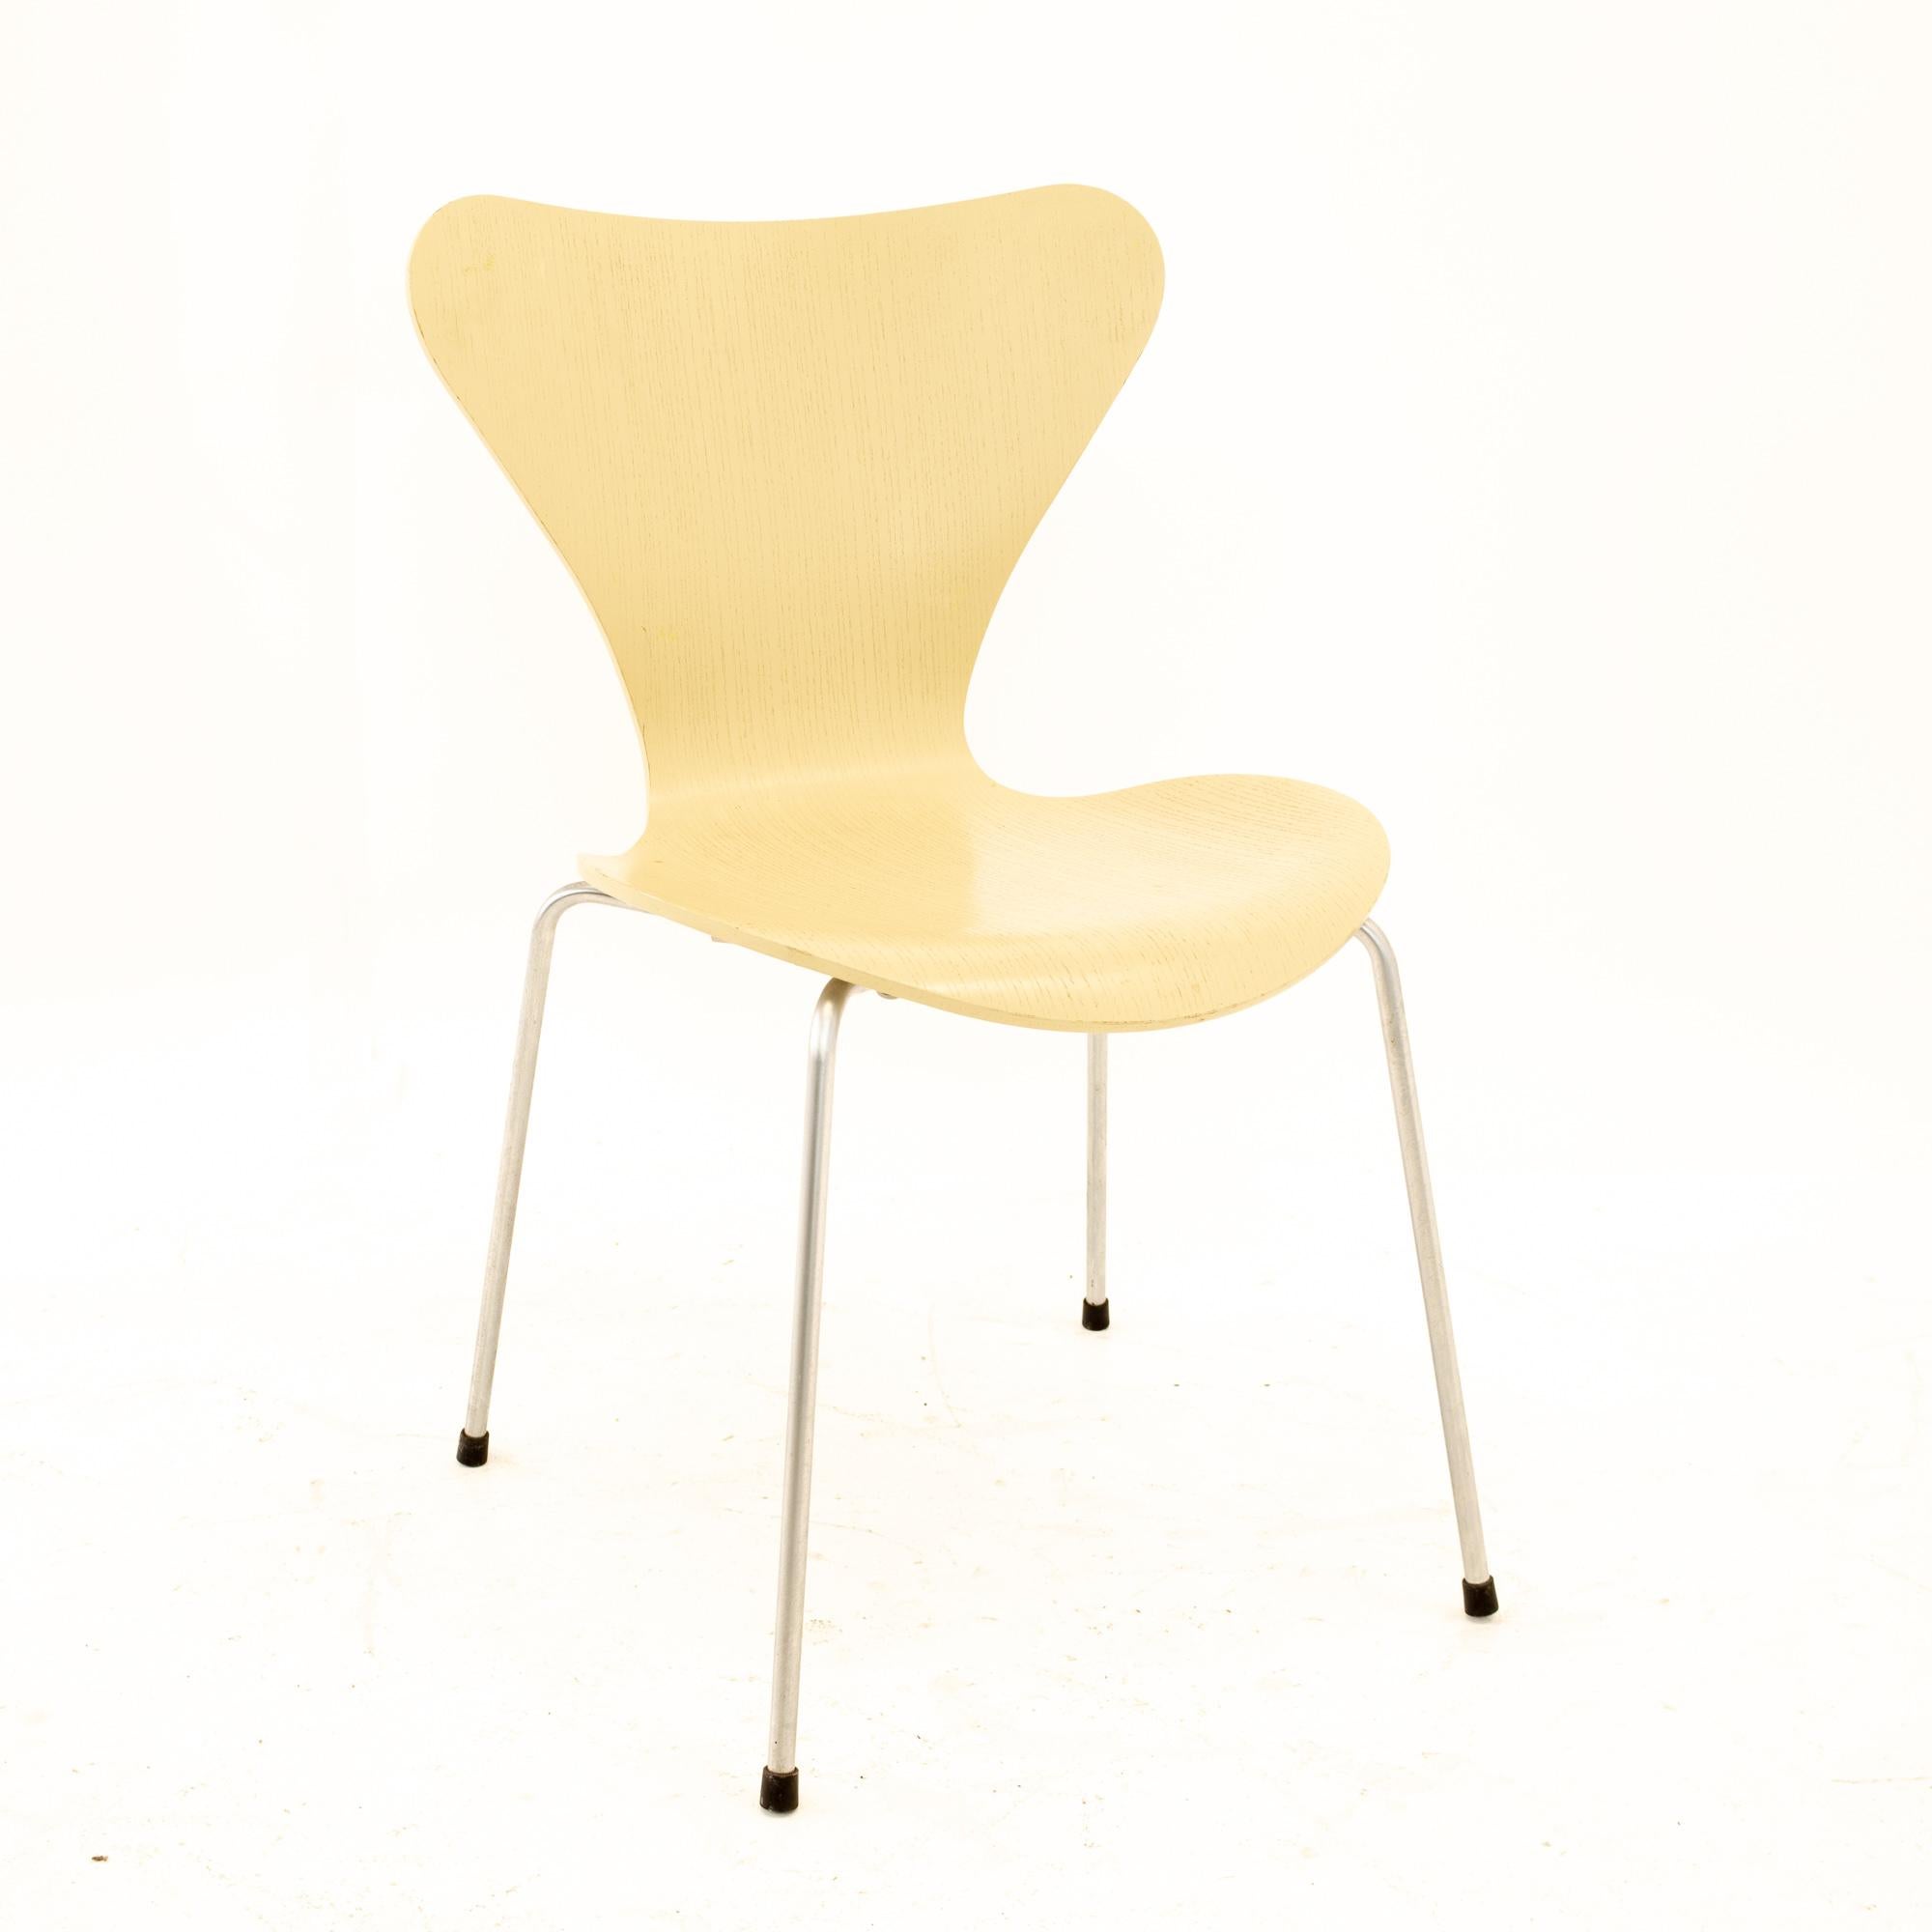 Arne Jacobsen for Fritz Hansen Mid-Century Modern Series 7 Chair, Set of 2 In Good Condition For Sale In Countryside, IL